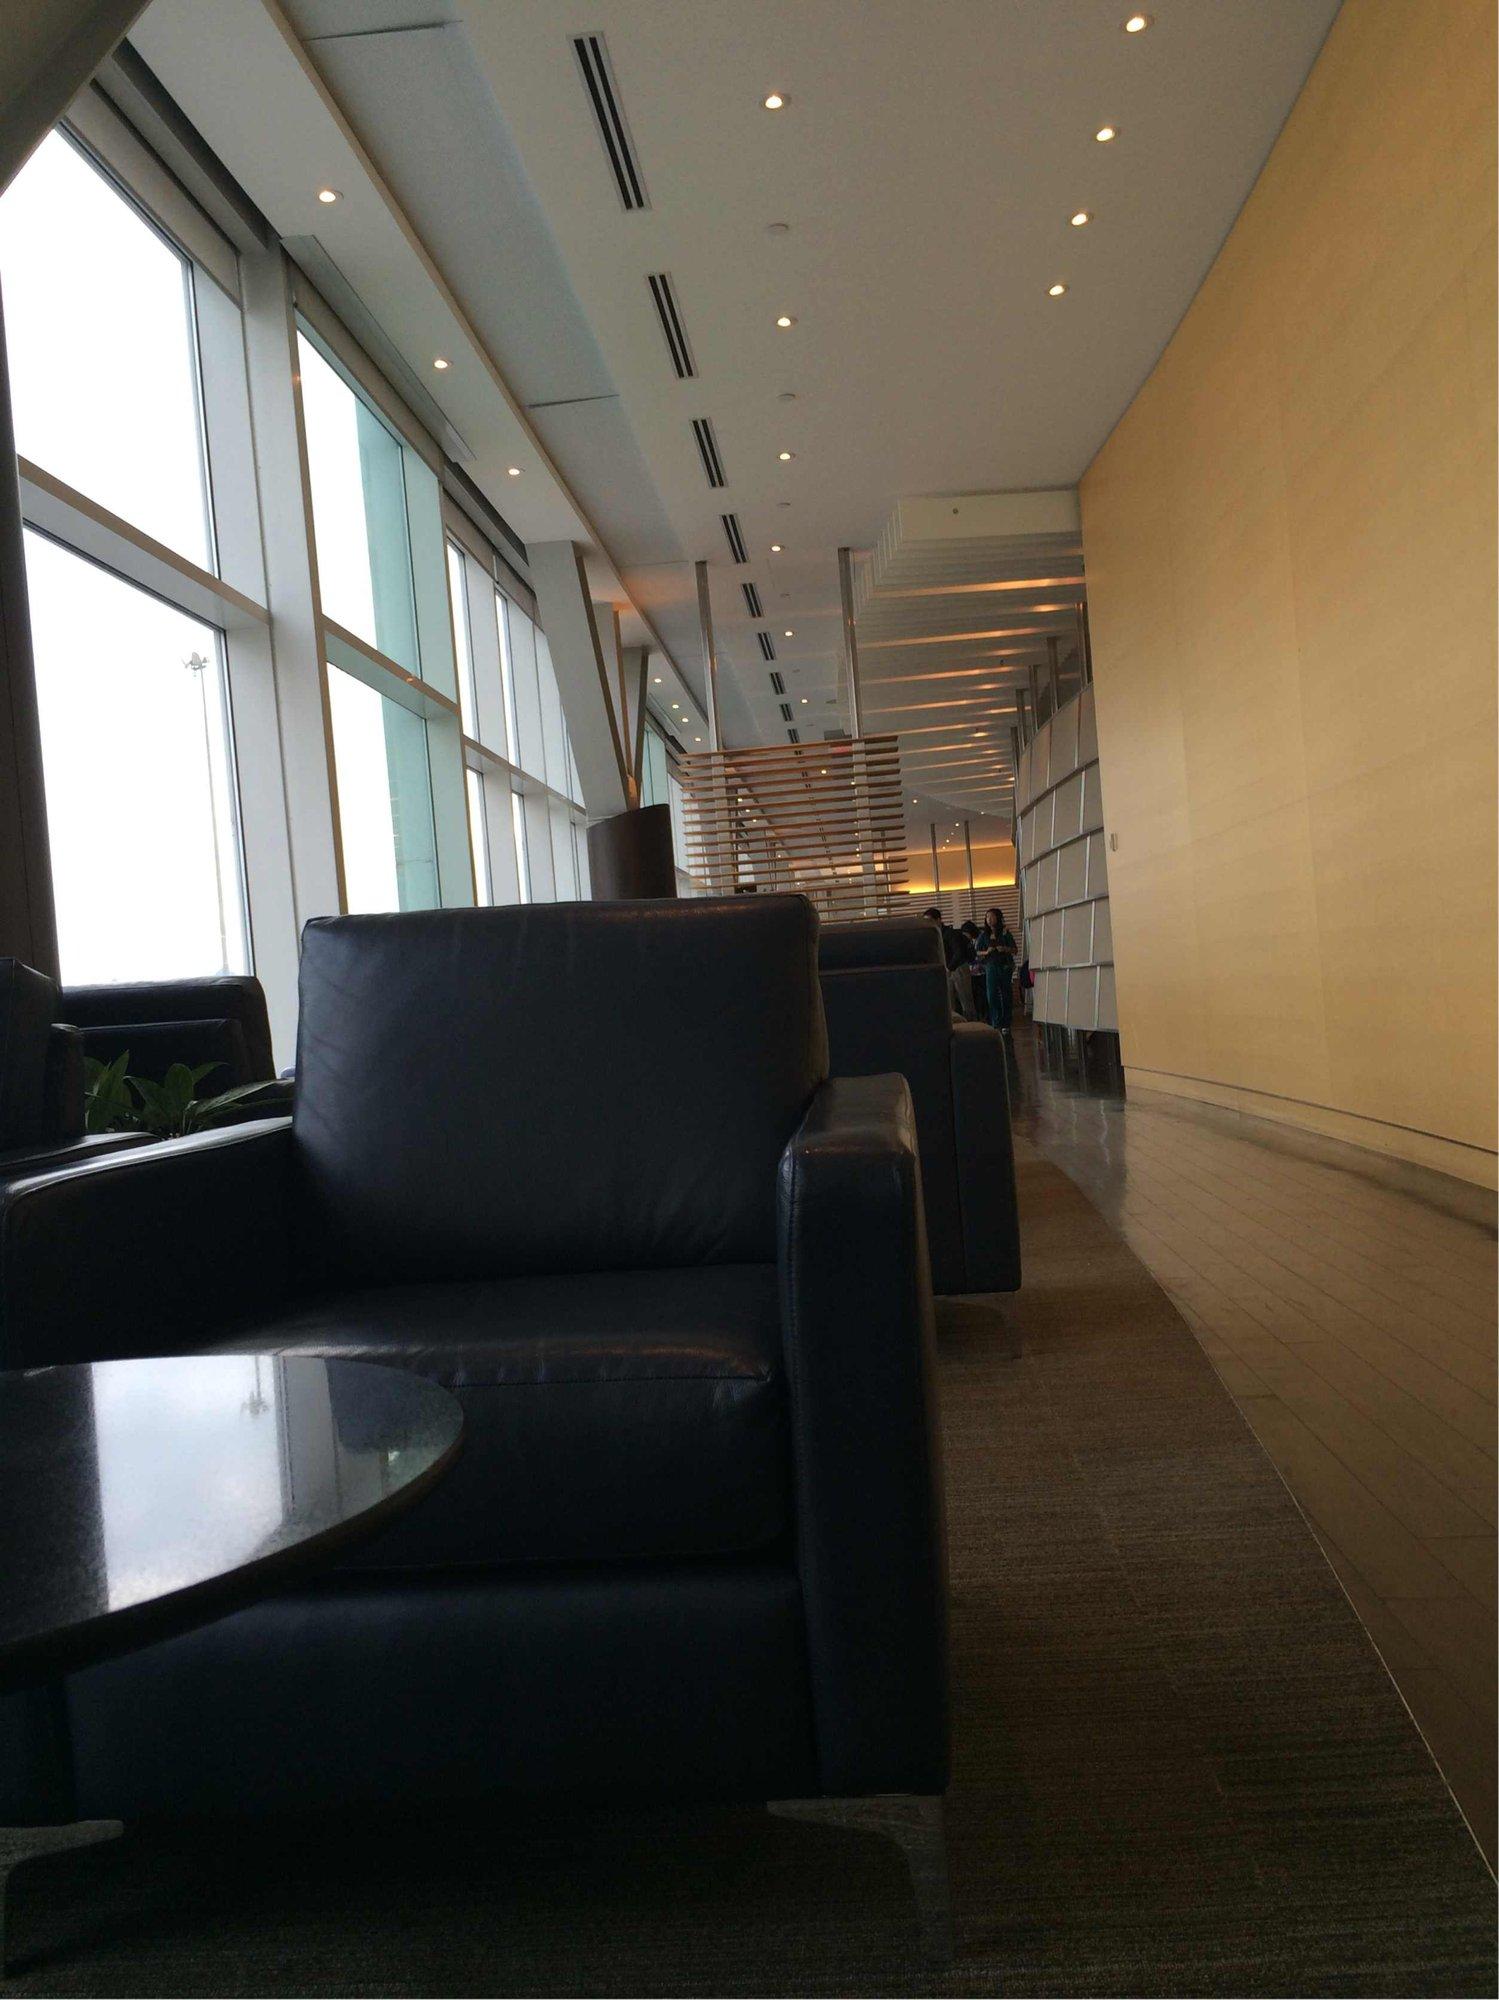 Air Canada Maple Leaf Lounge image 15 of 17